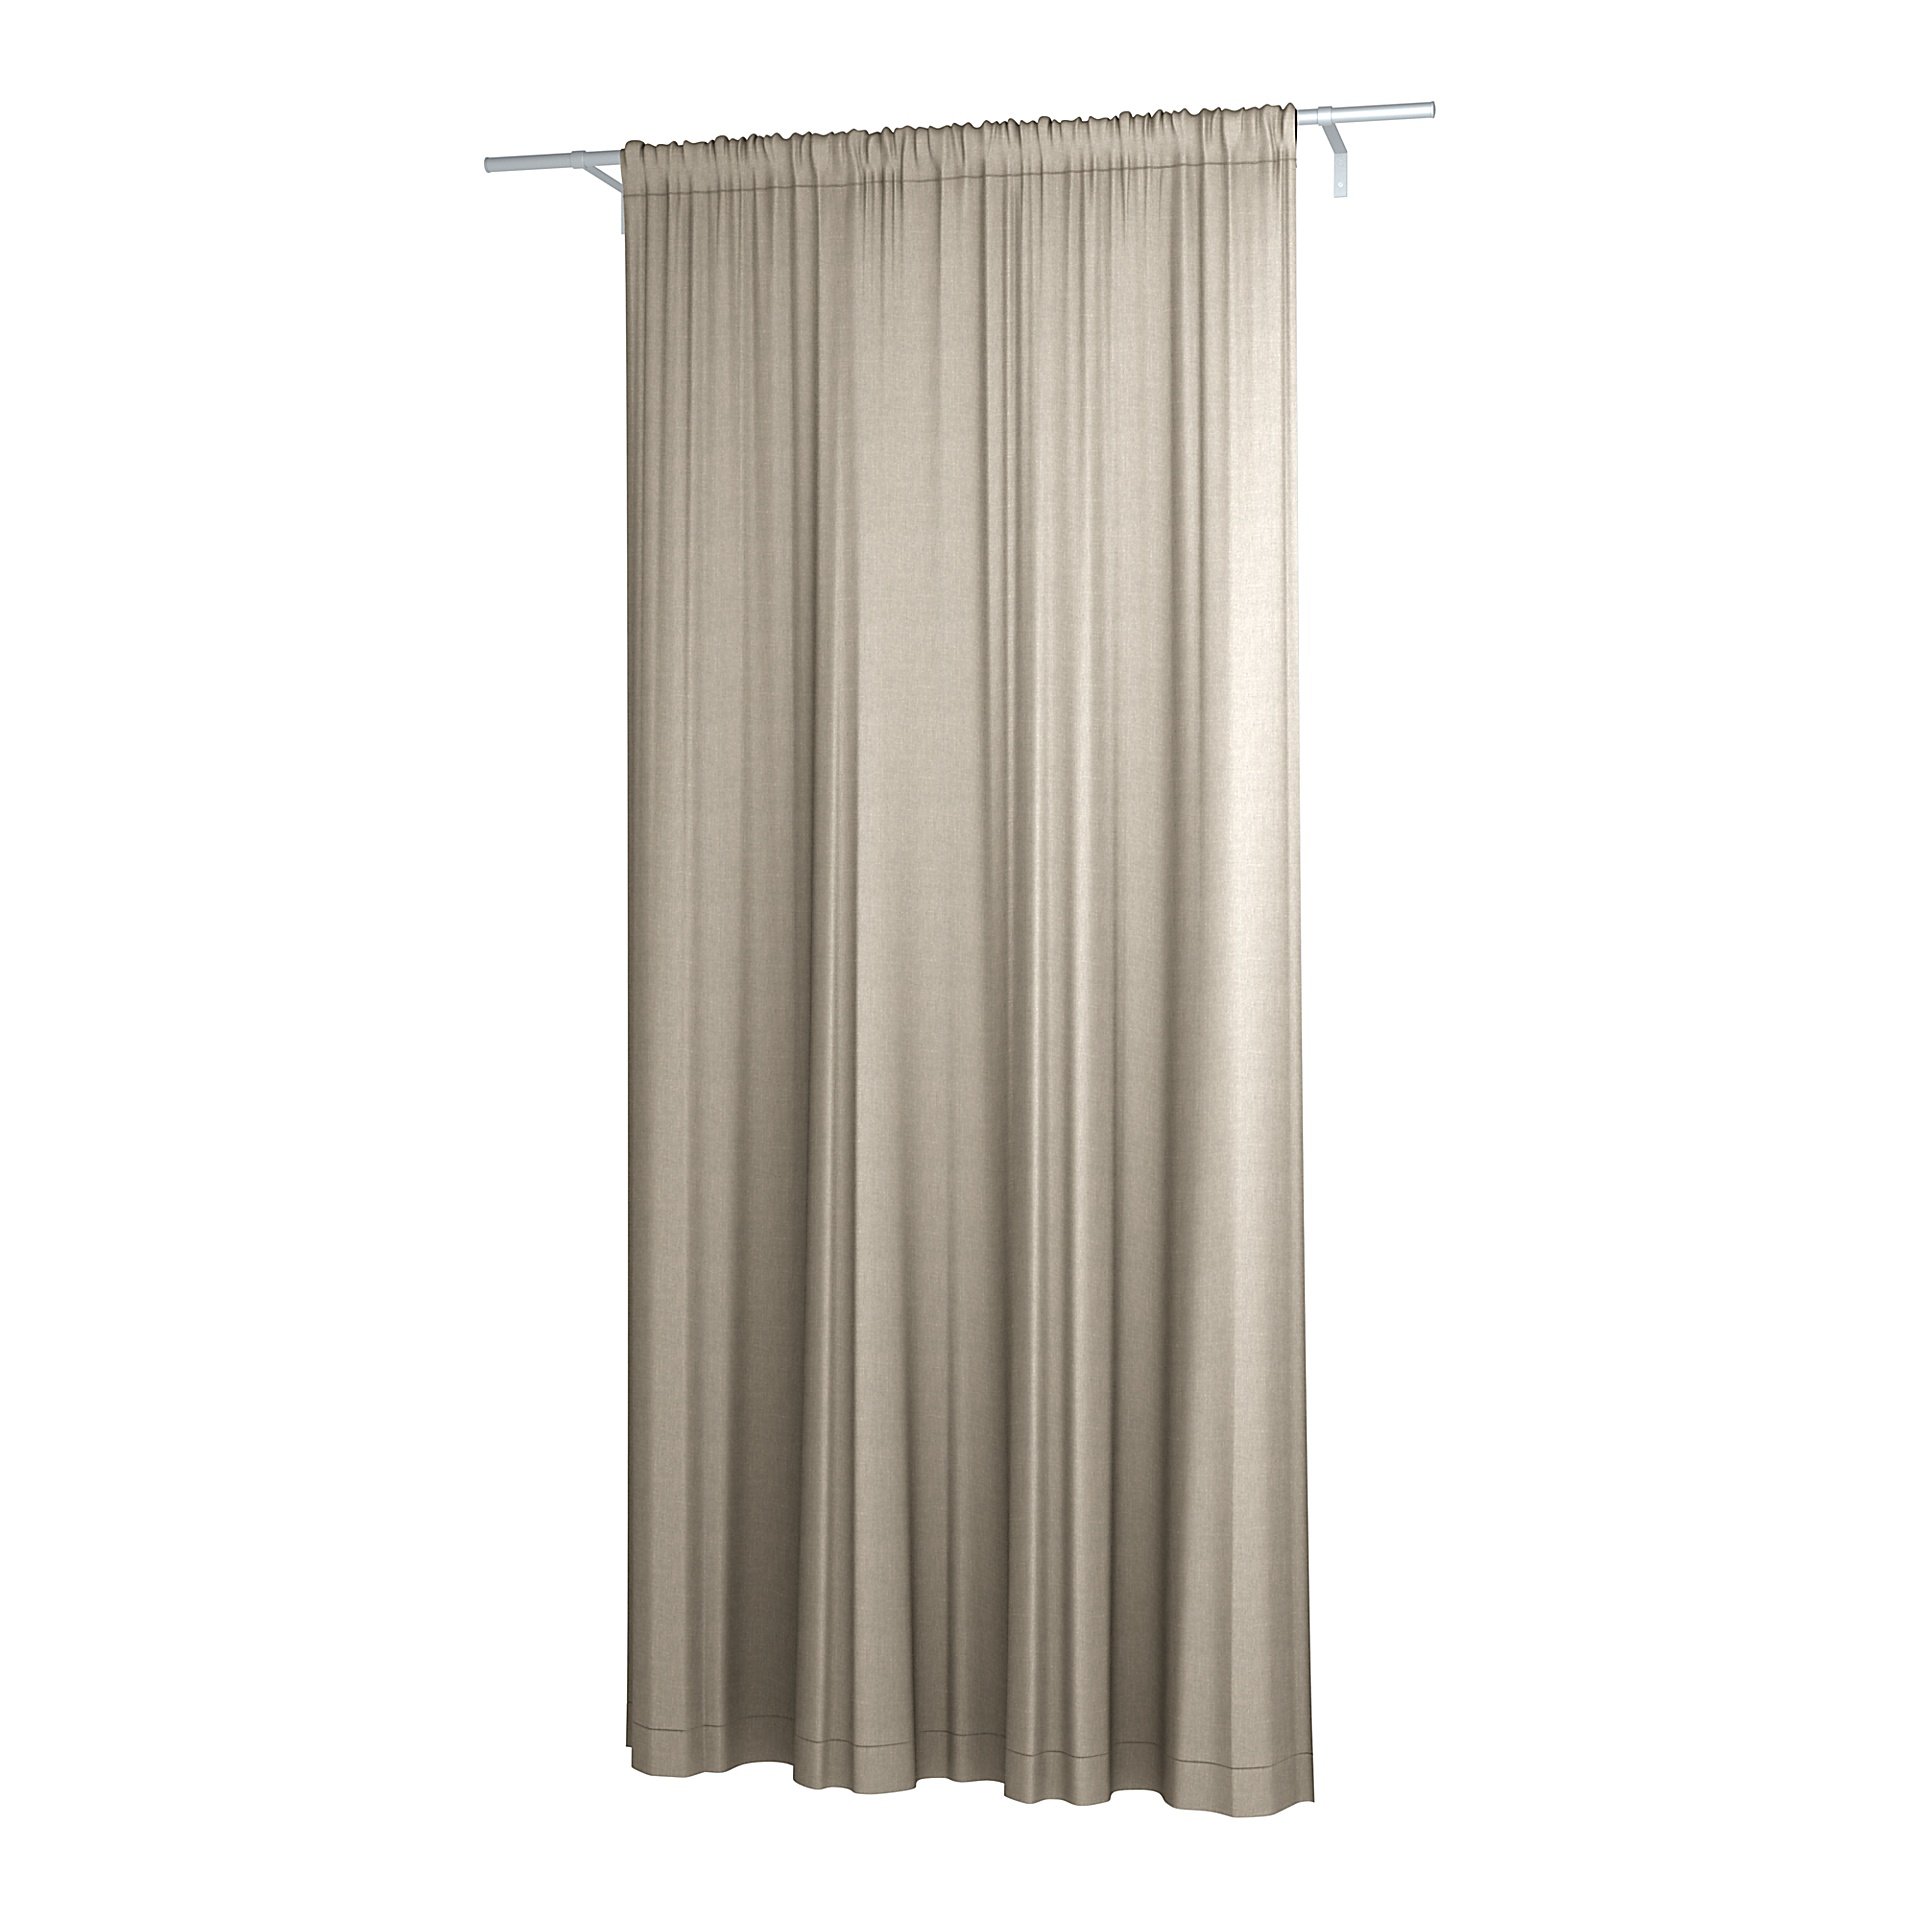 Double Width Curtain Panel with Tunnel/Creaseband, Customized, Natural, Linen - Bemz